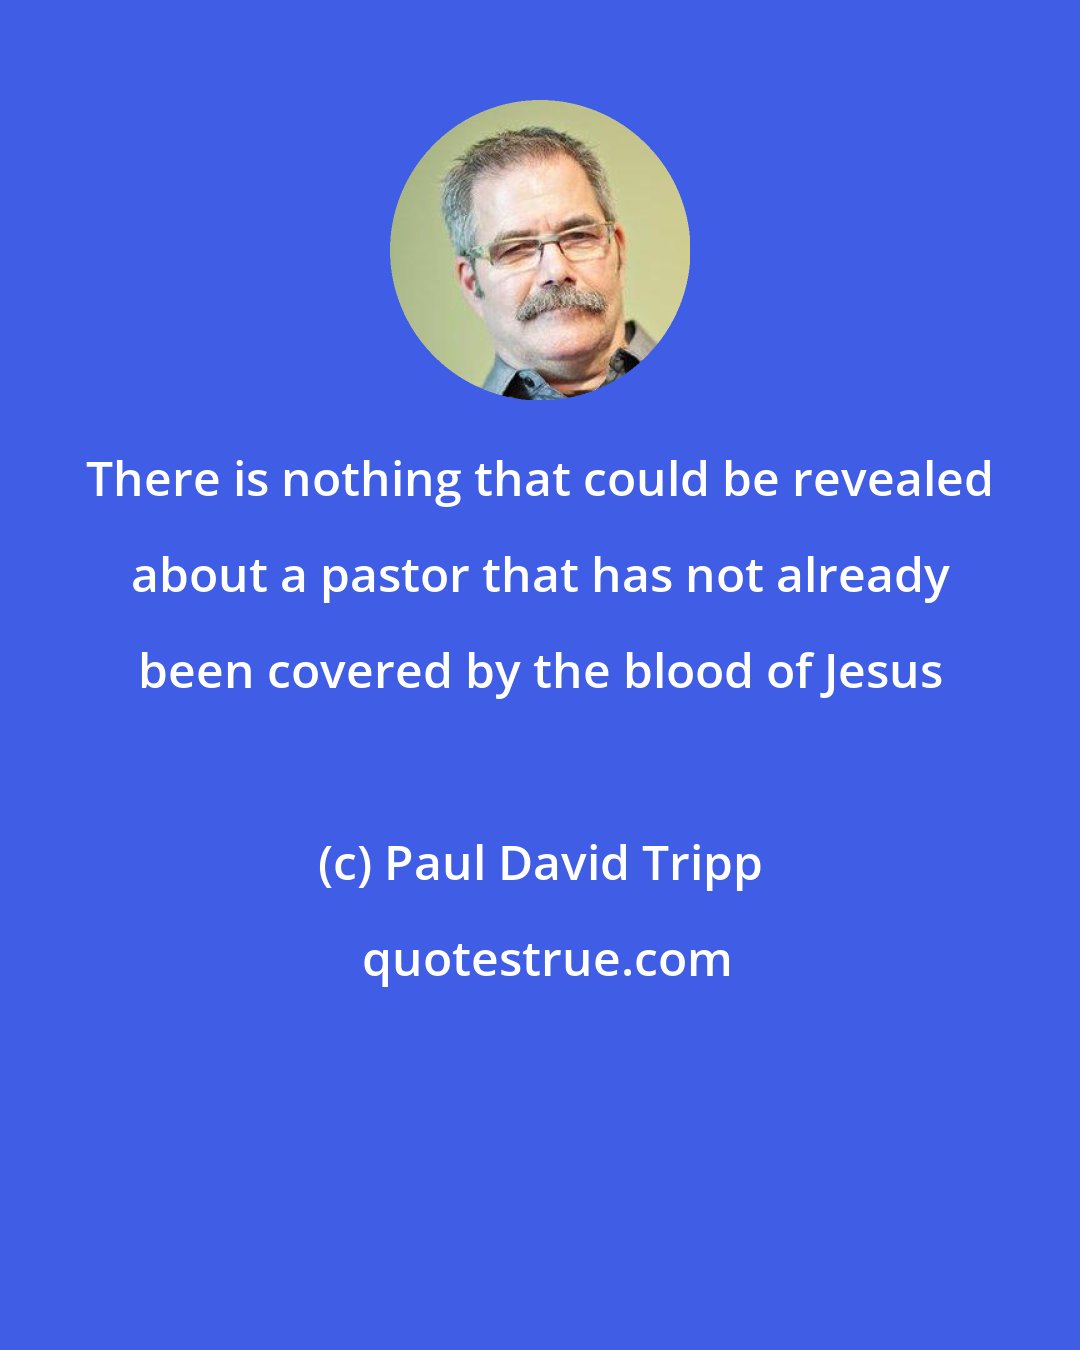 Paul David Tripp: There is nothing that could be revealed about a pastor that has not already been covered by the blood of Jesus